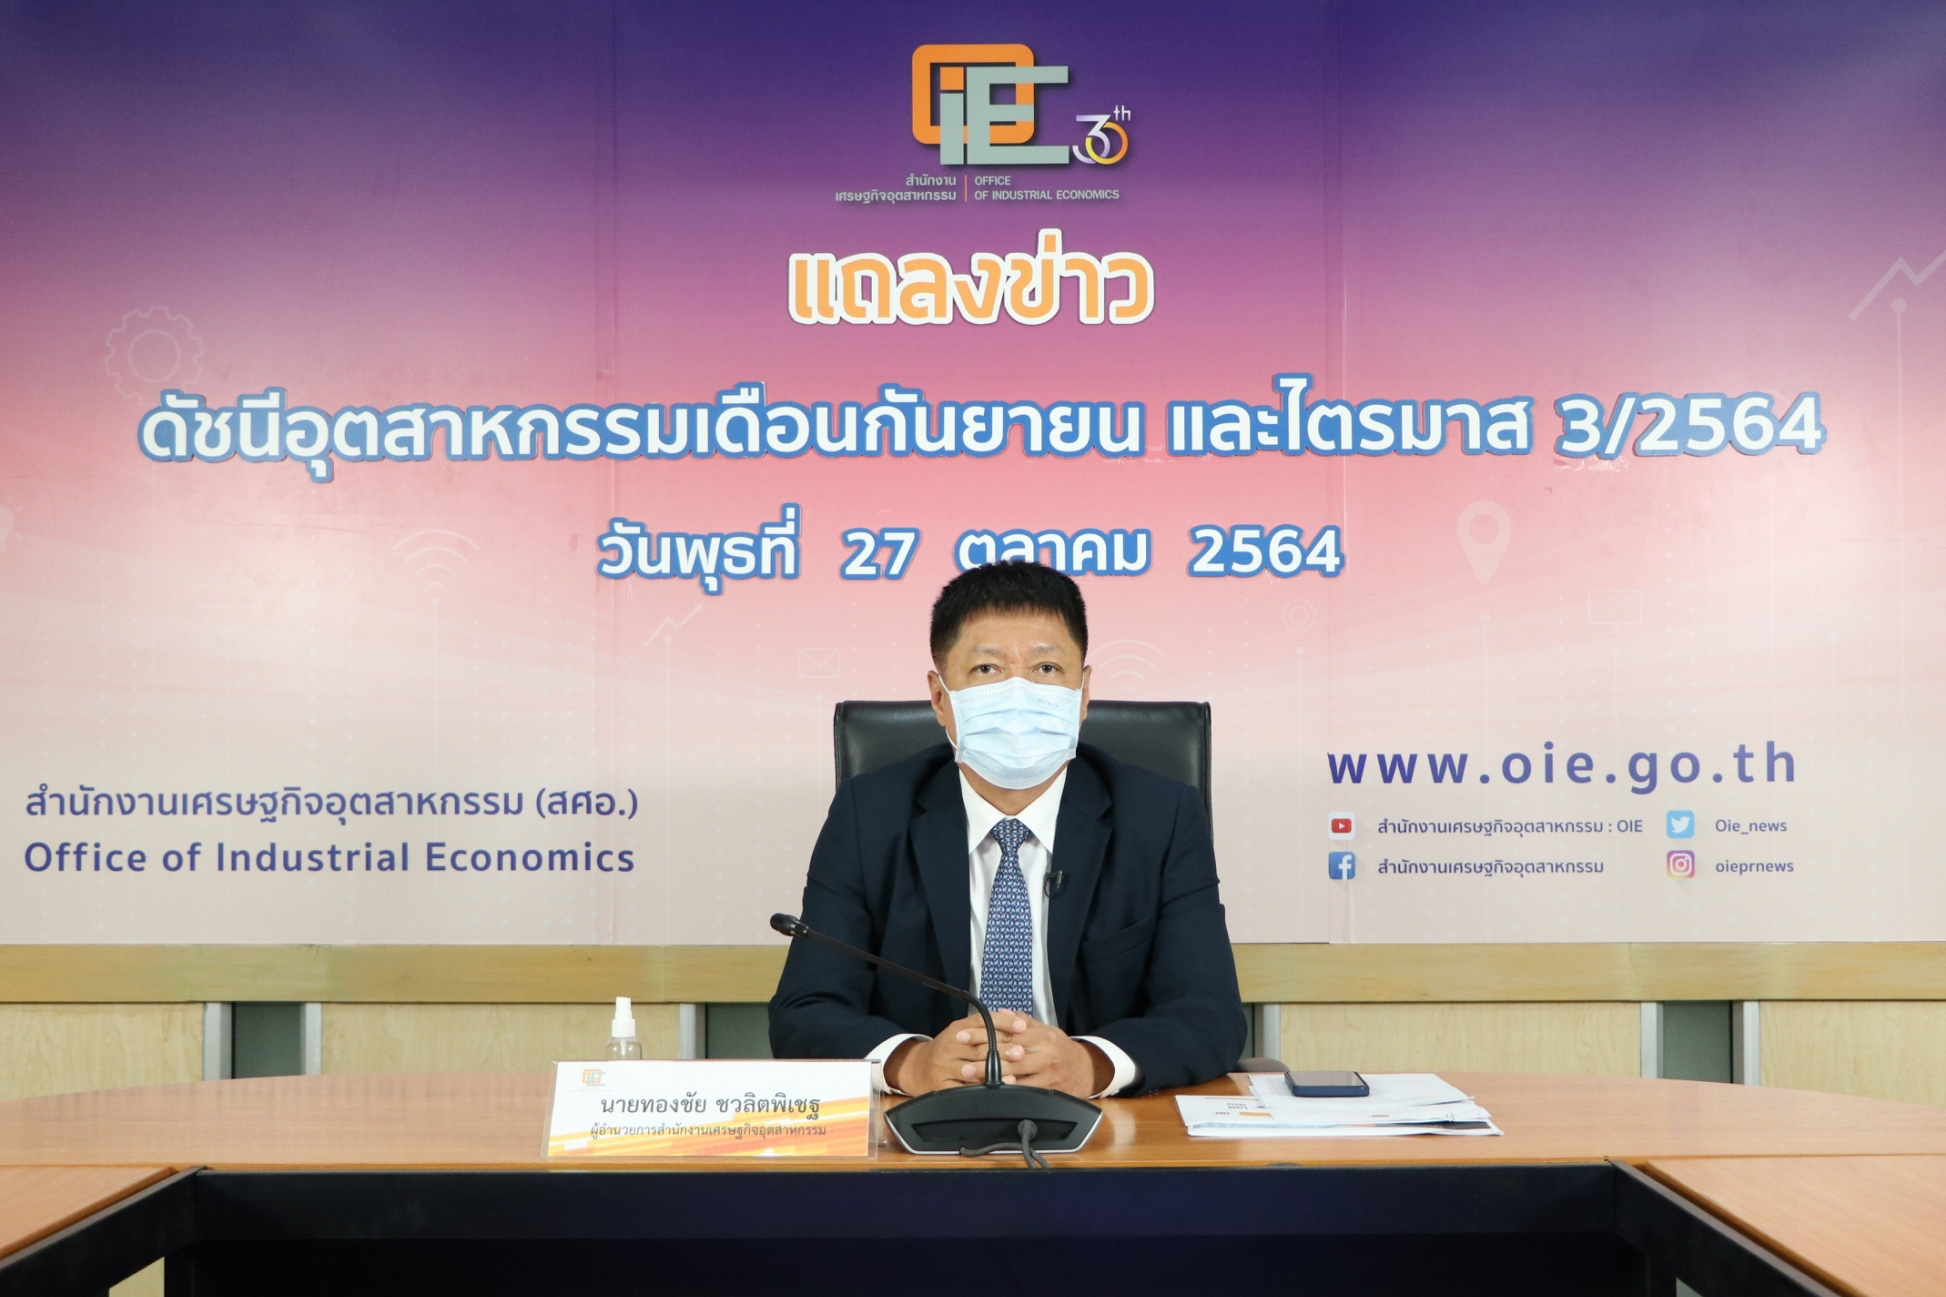 Today (October 27th, 2021) Mr. Thongchai Chawalitpichaet, the Director of the Office of Industrial Economics, held a press release of industrial indexes for September and the third quarter of 2021 via